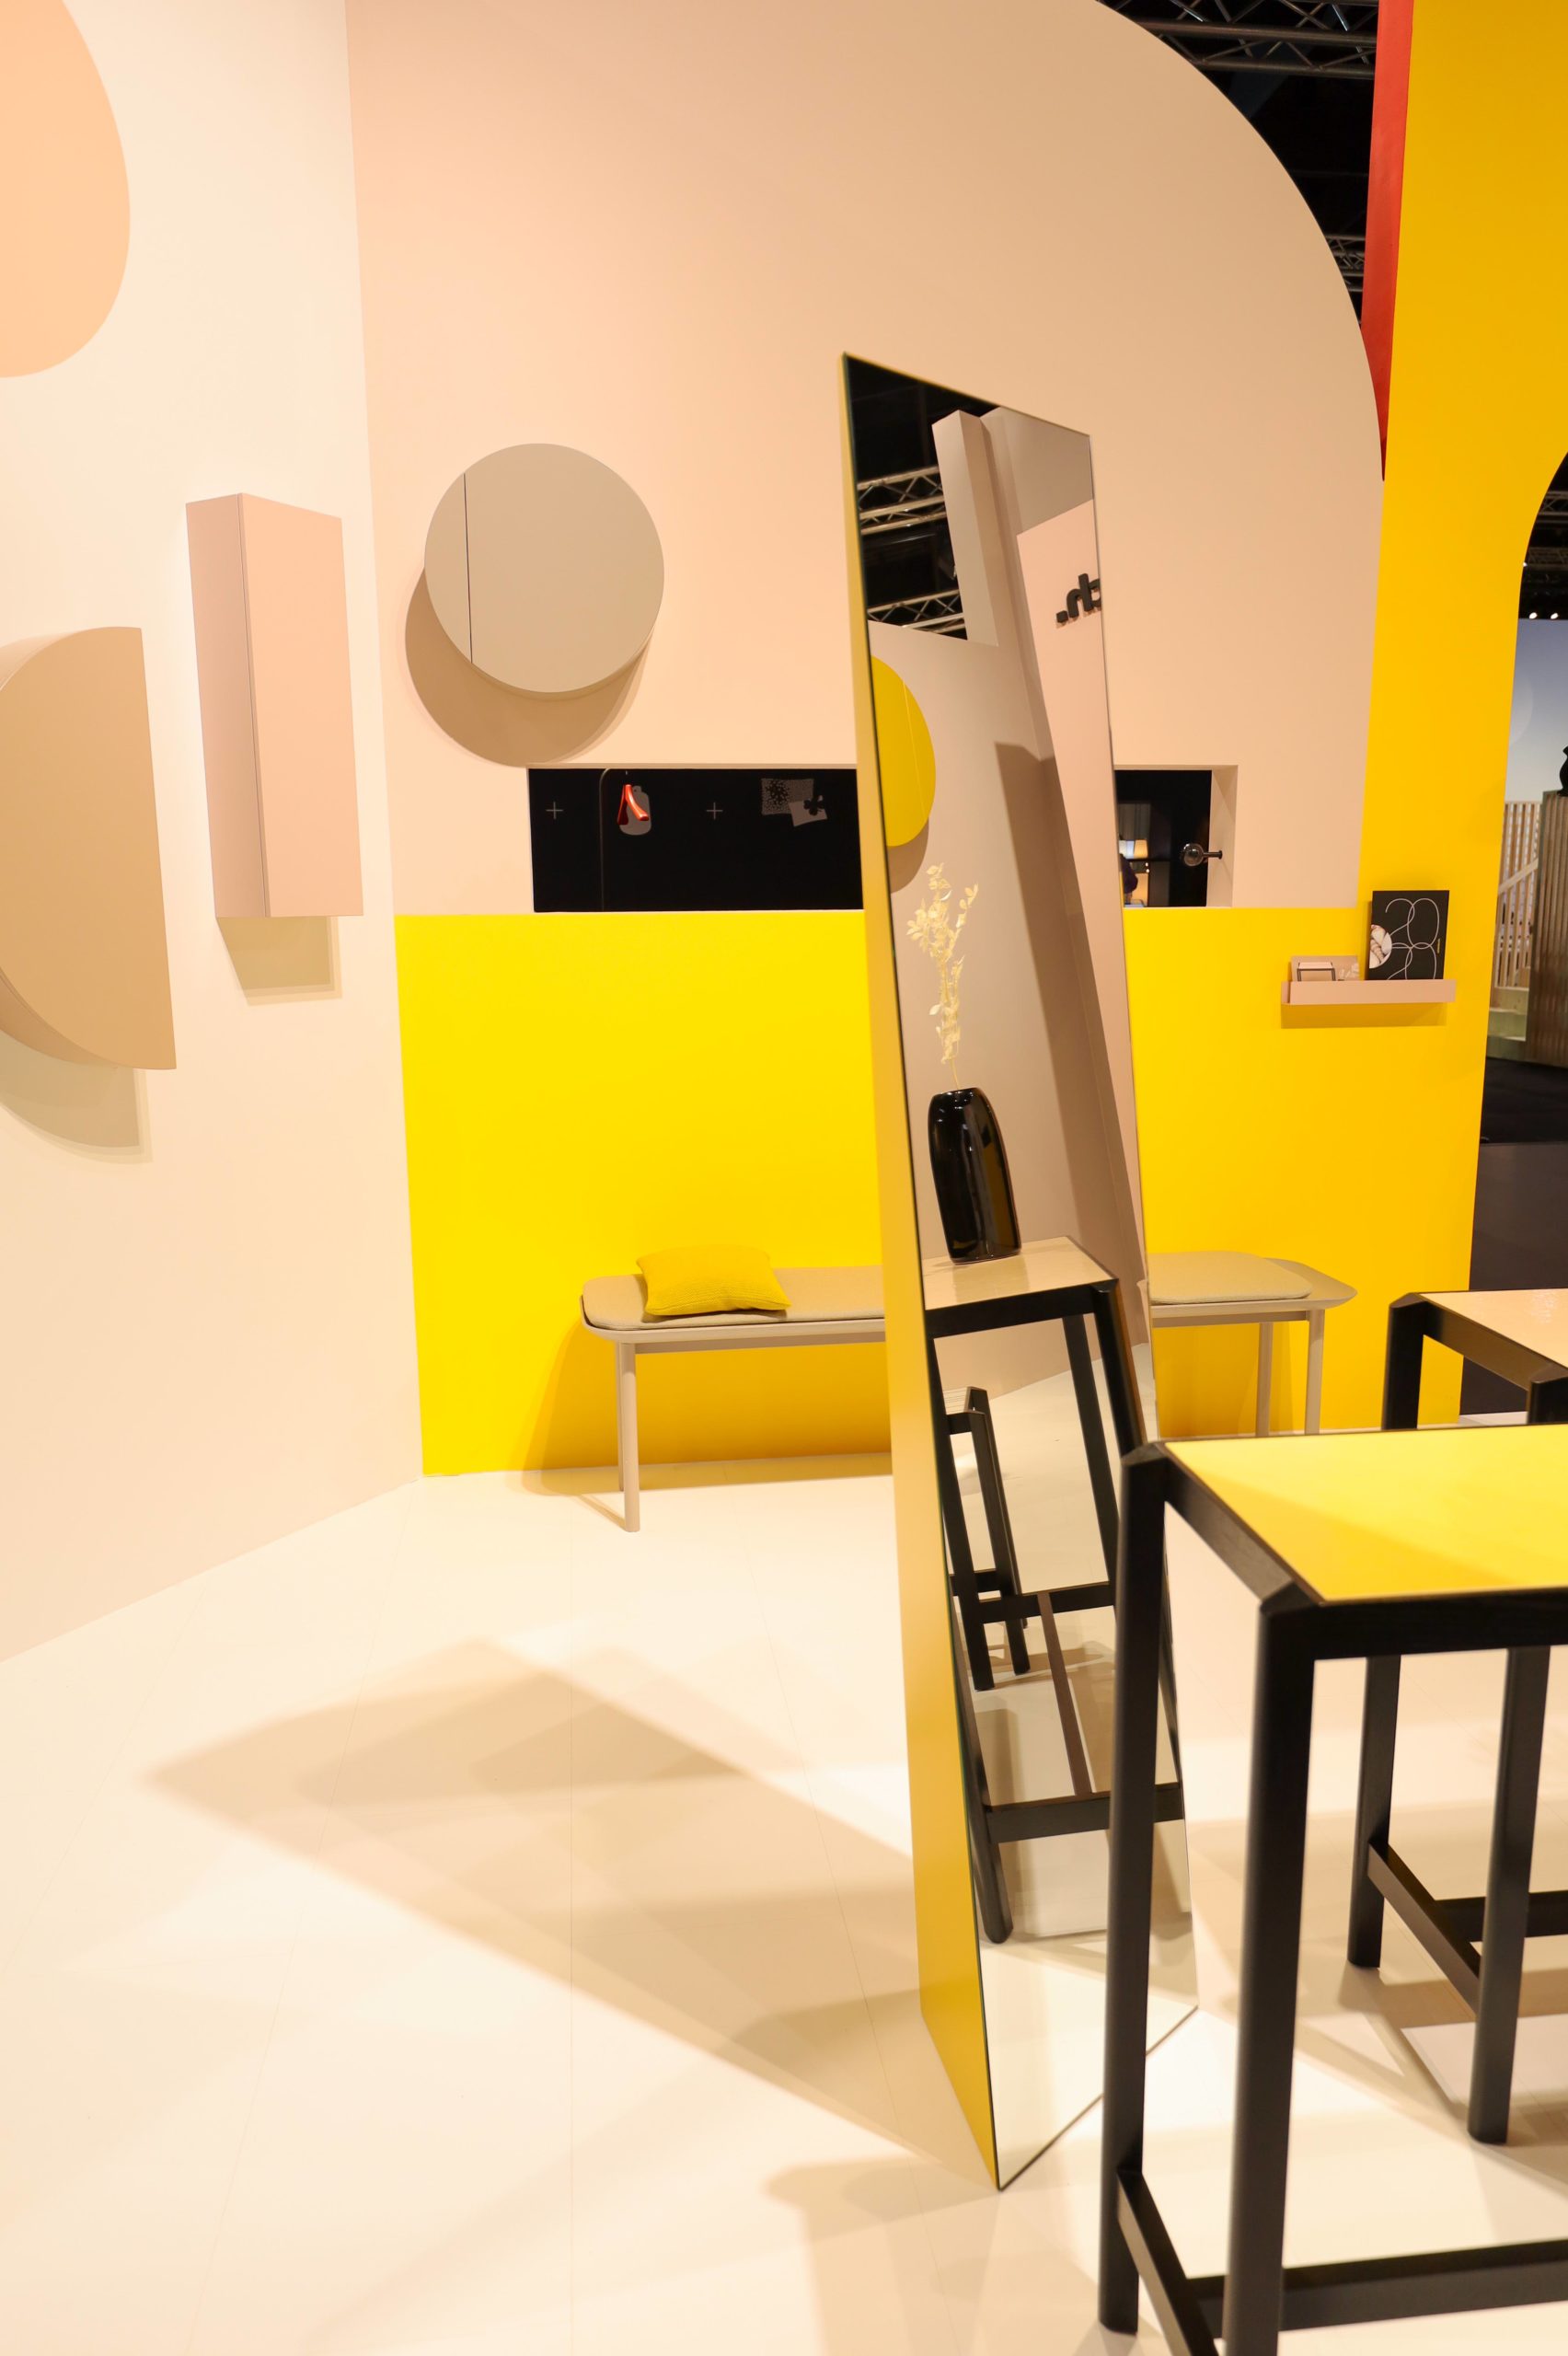 imm cologne 2020 trends predictions